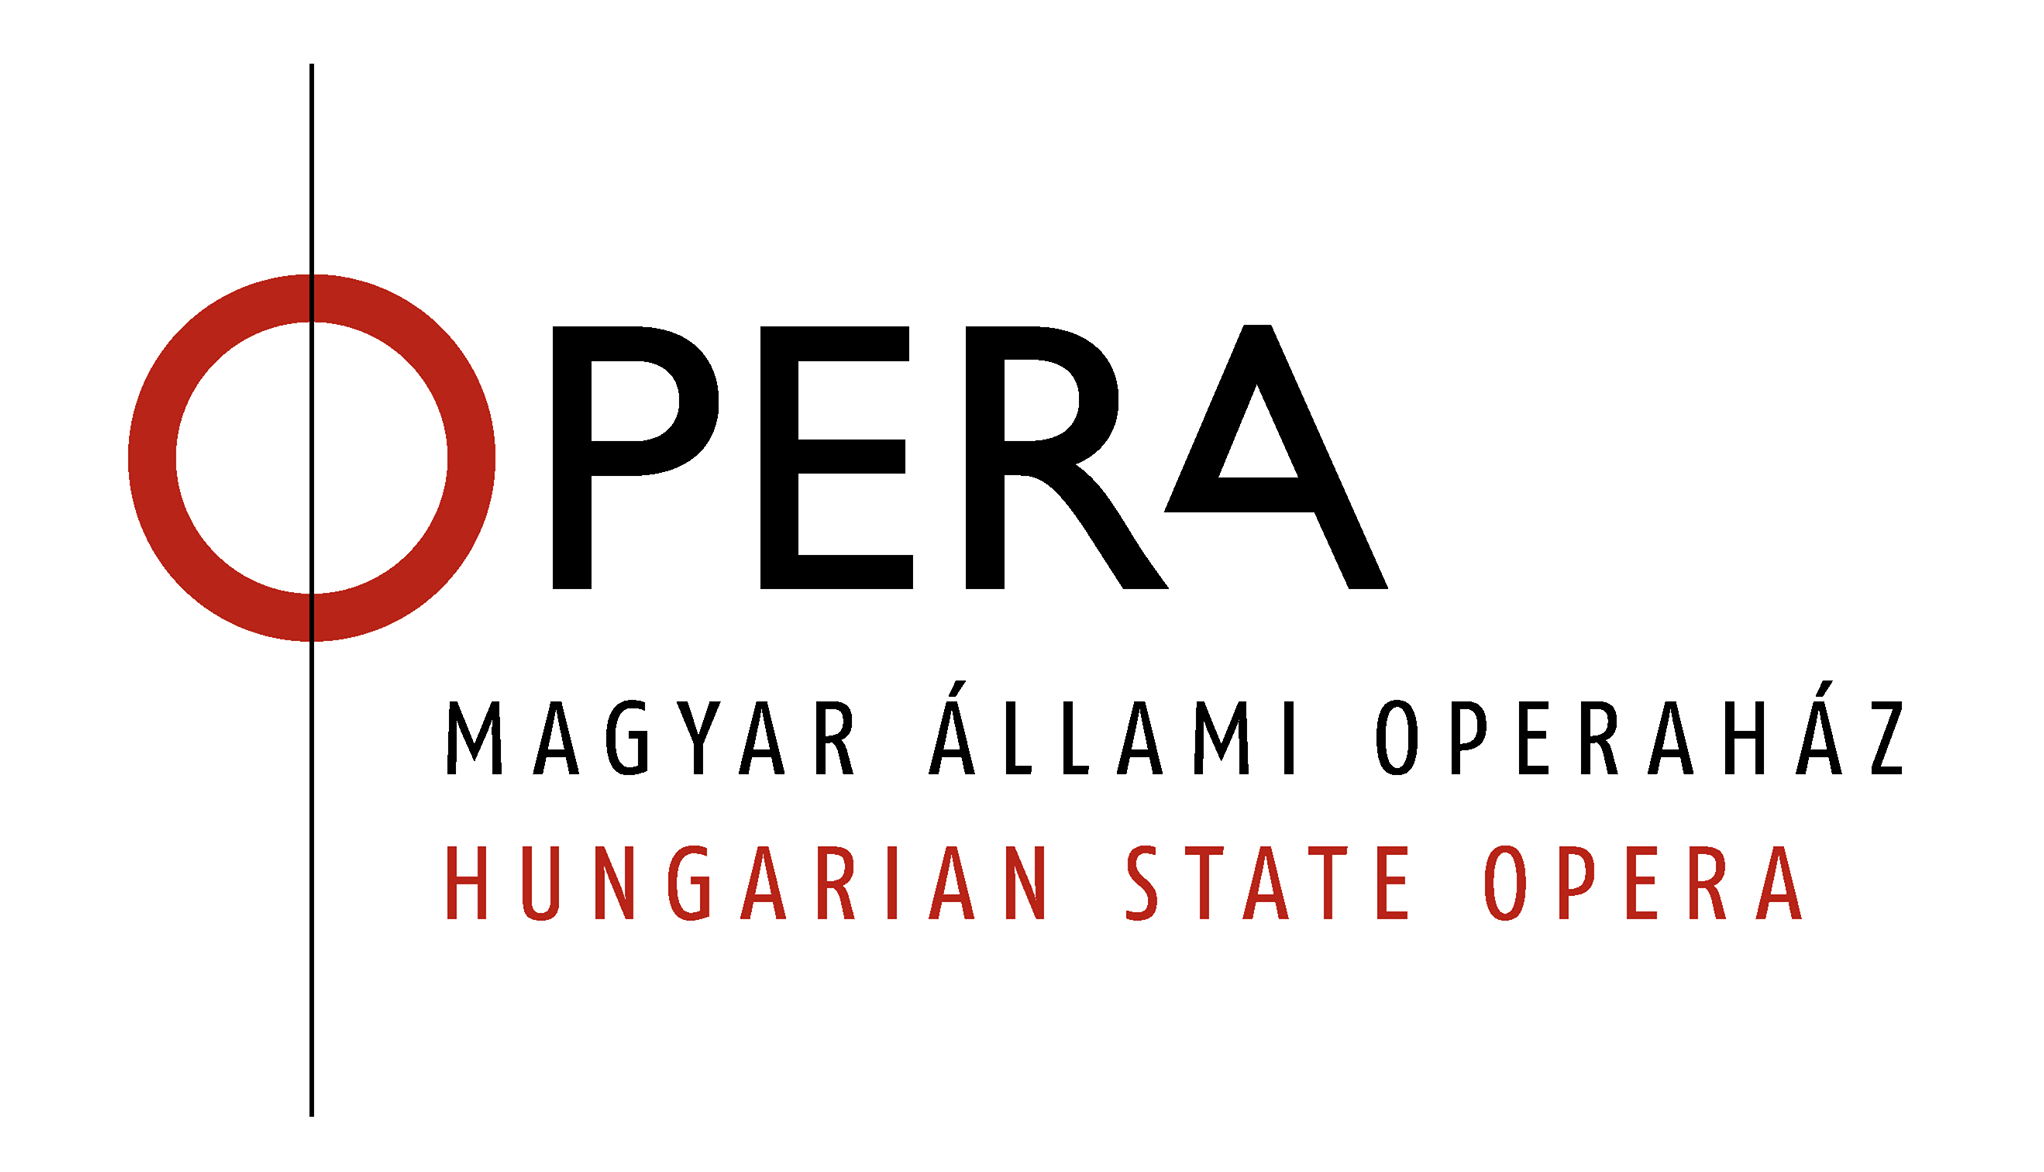 Facing apathy from Hungarian State Opera, Hindus to approach Orbán about dropping “La Bayadère”